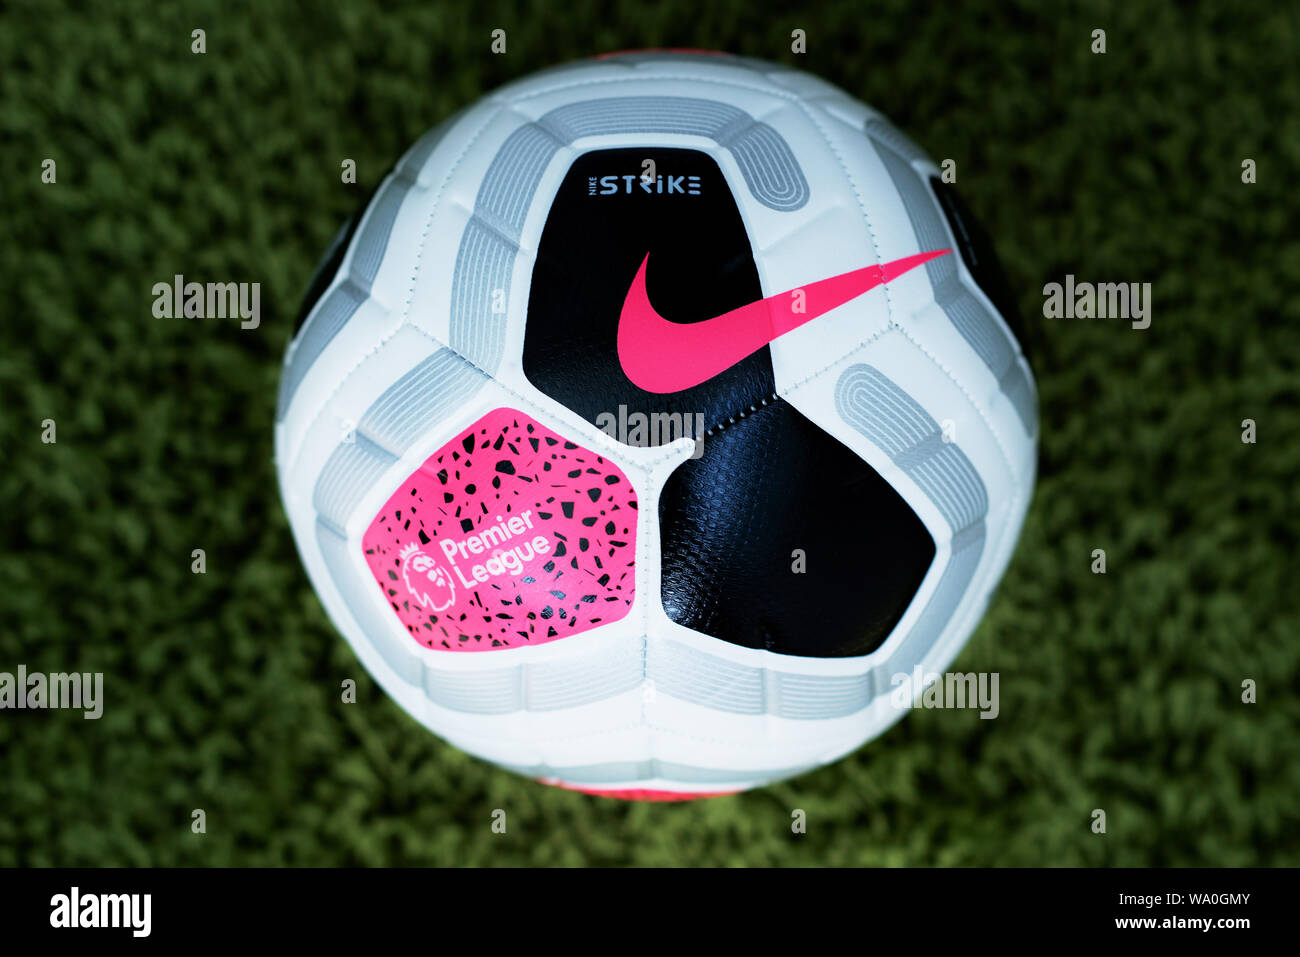 Nike Launches Premier League Merlin Ball 2019 20 Season High Resolution  Stock Photography and Images - Alamy